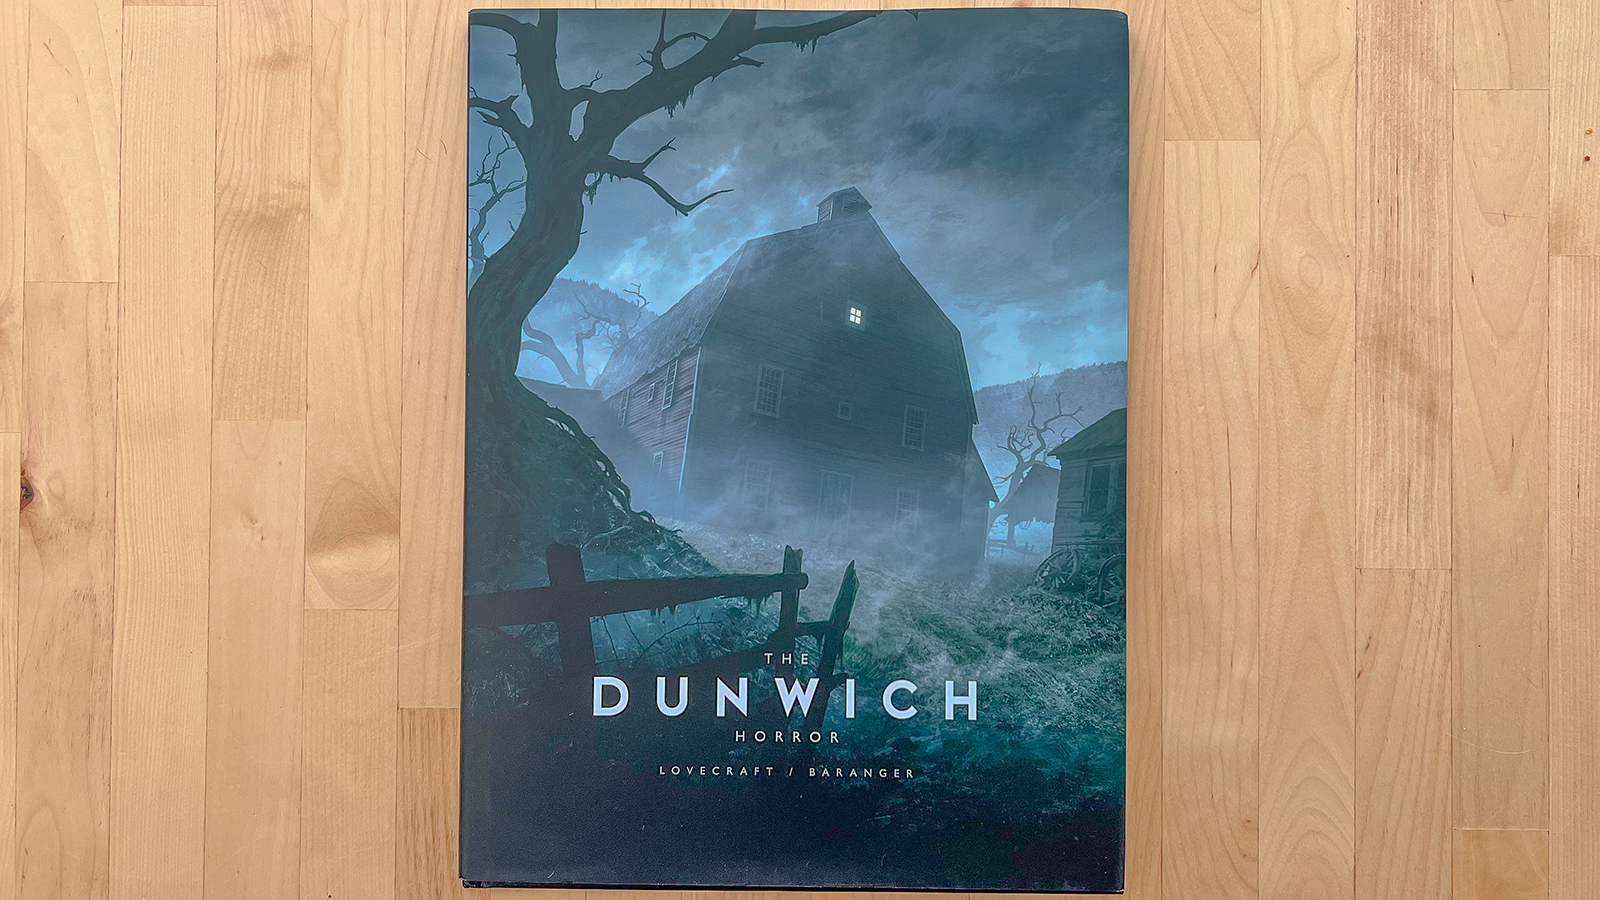 A photo of the front cover of The Dunwich Horror